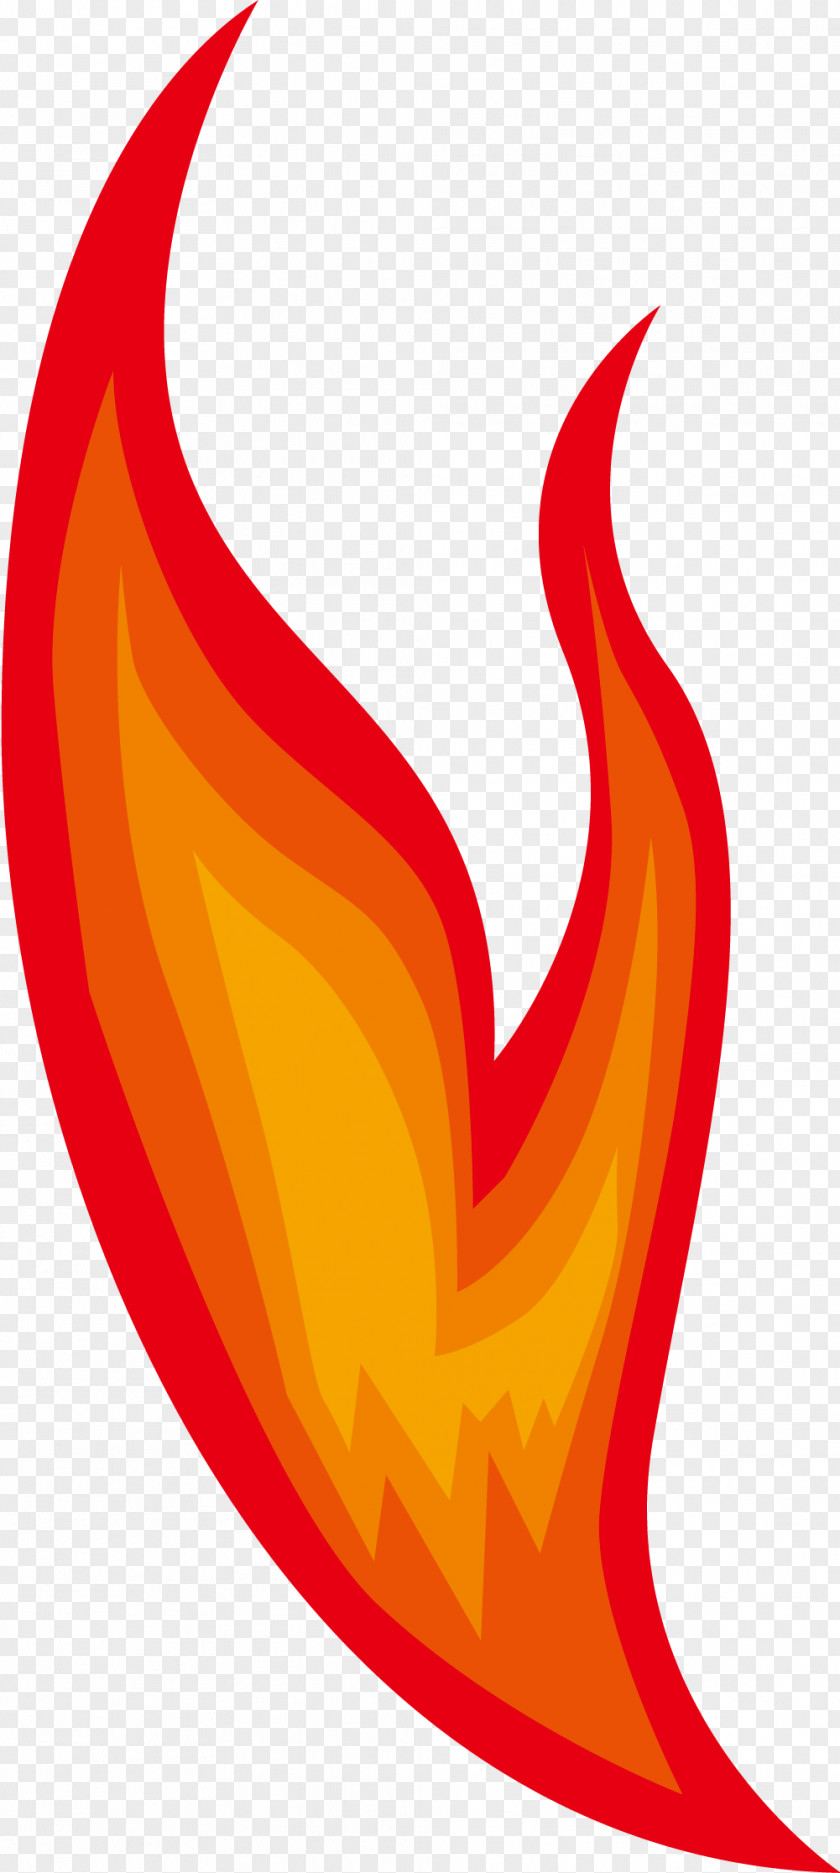 Hand Painted Red Flame Clip Art PNG